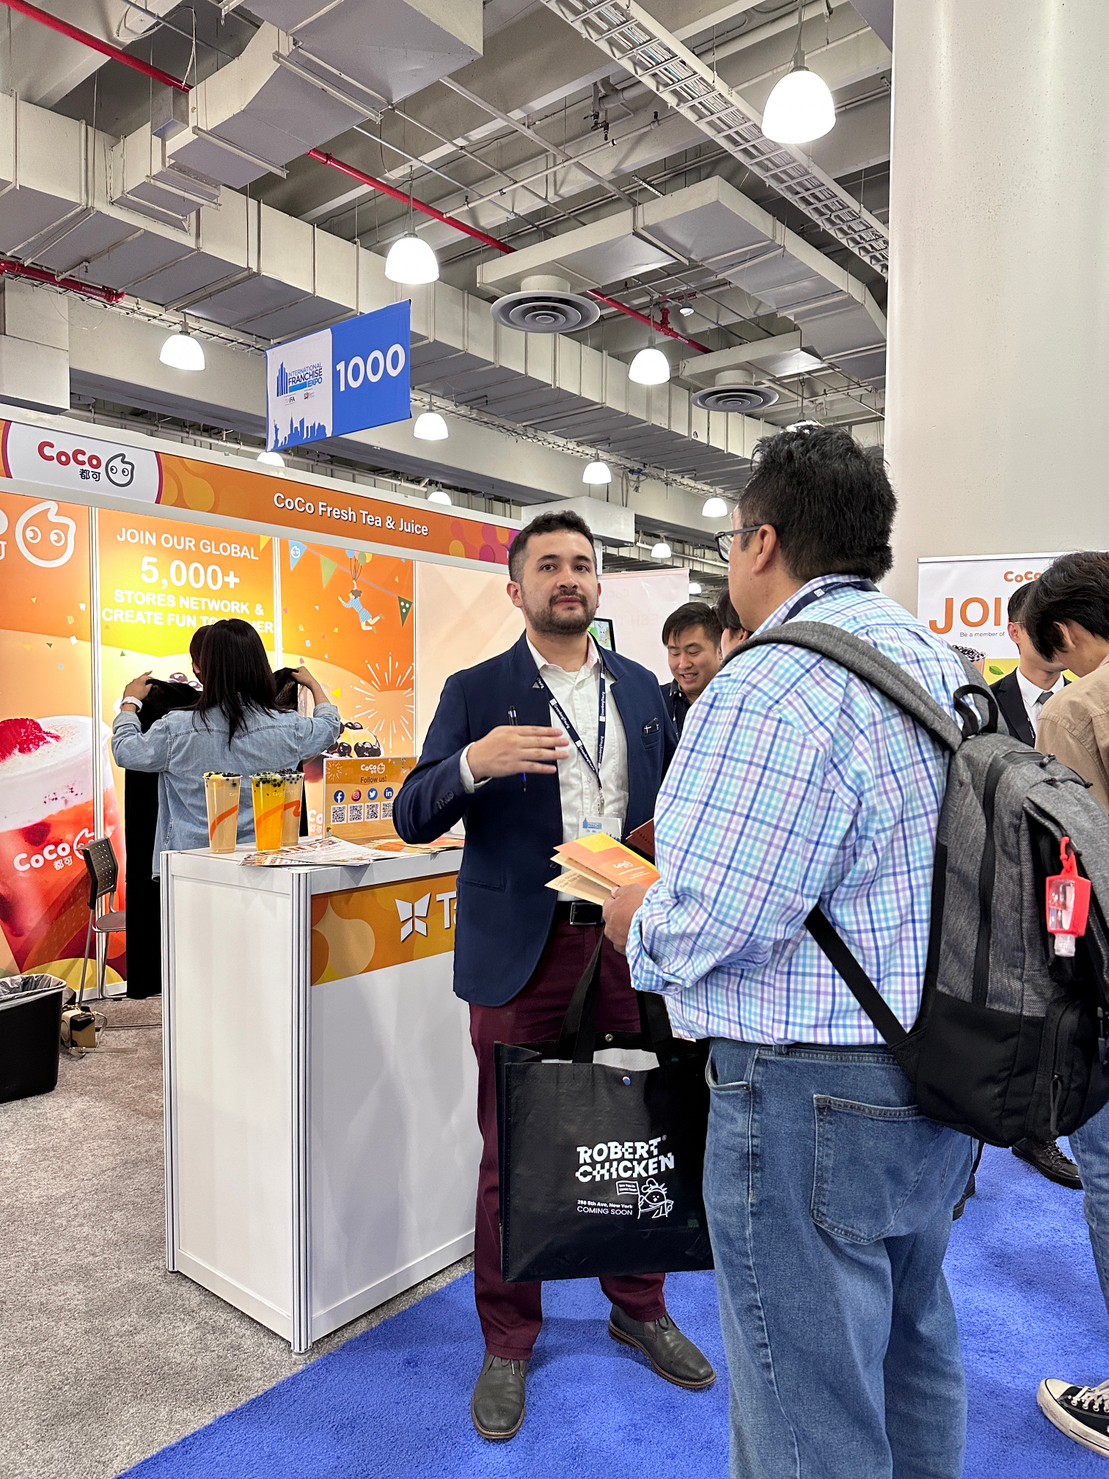 New York Franchise expo - geting more franchise news